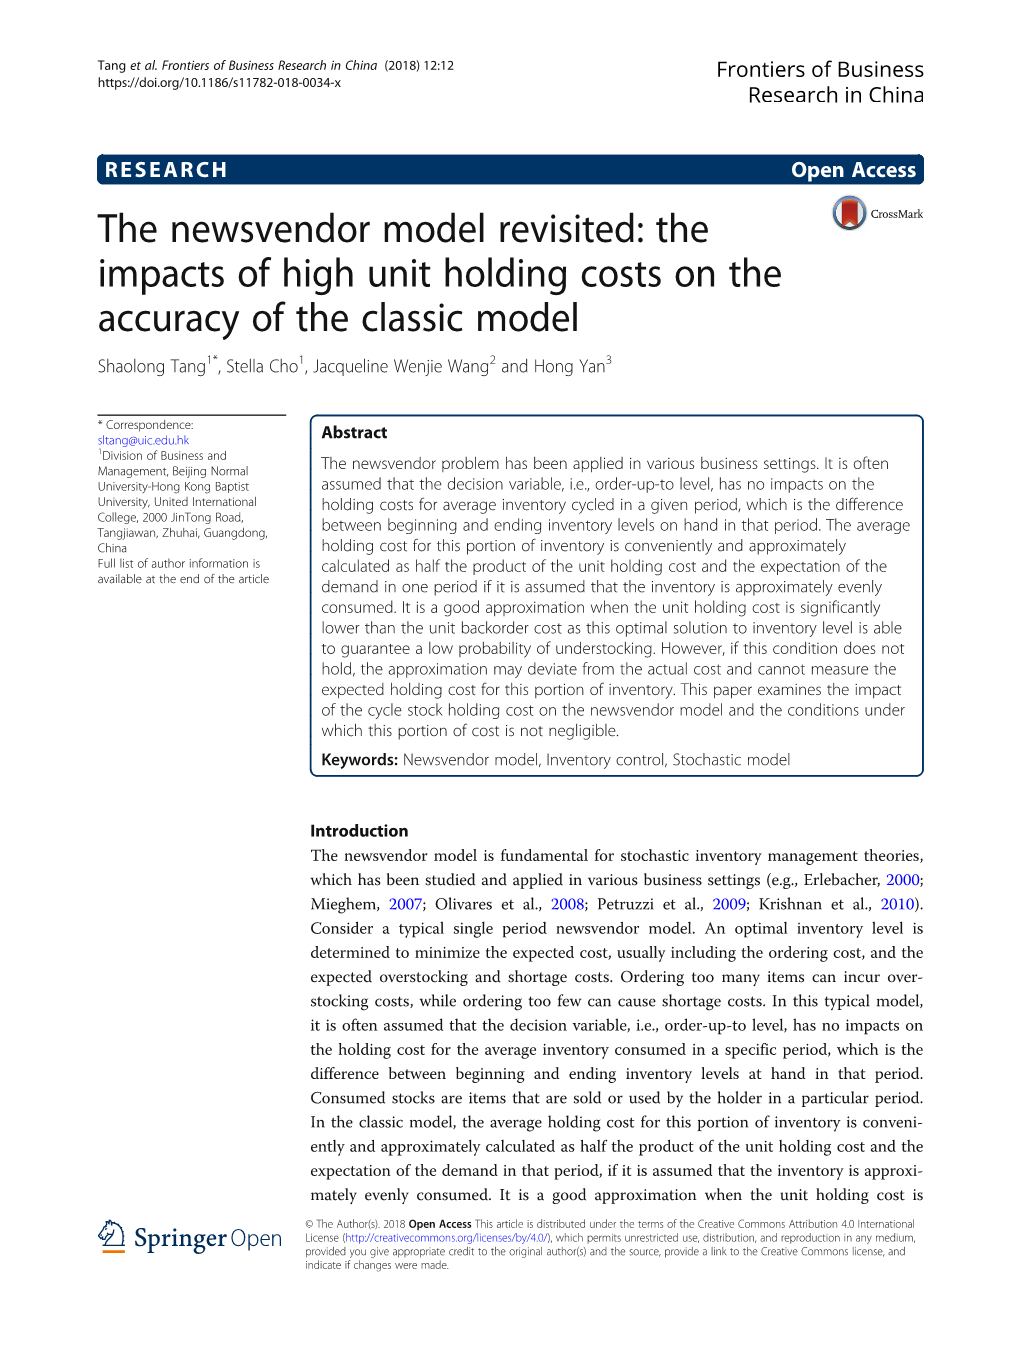 The Newsvendor Model Revisited: the Impacts of High Unit Holding Costs